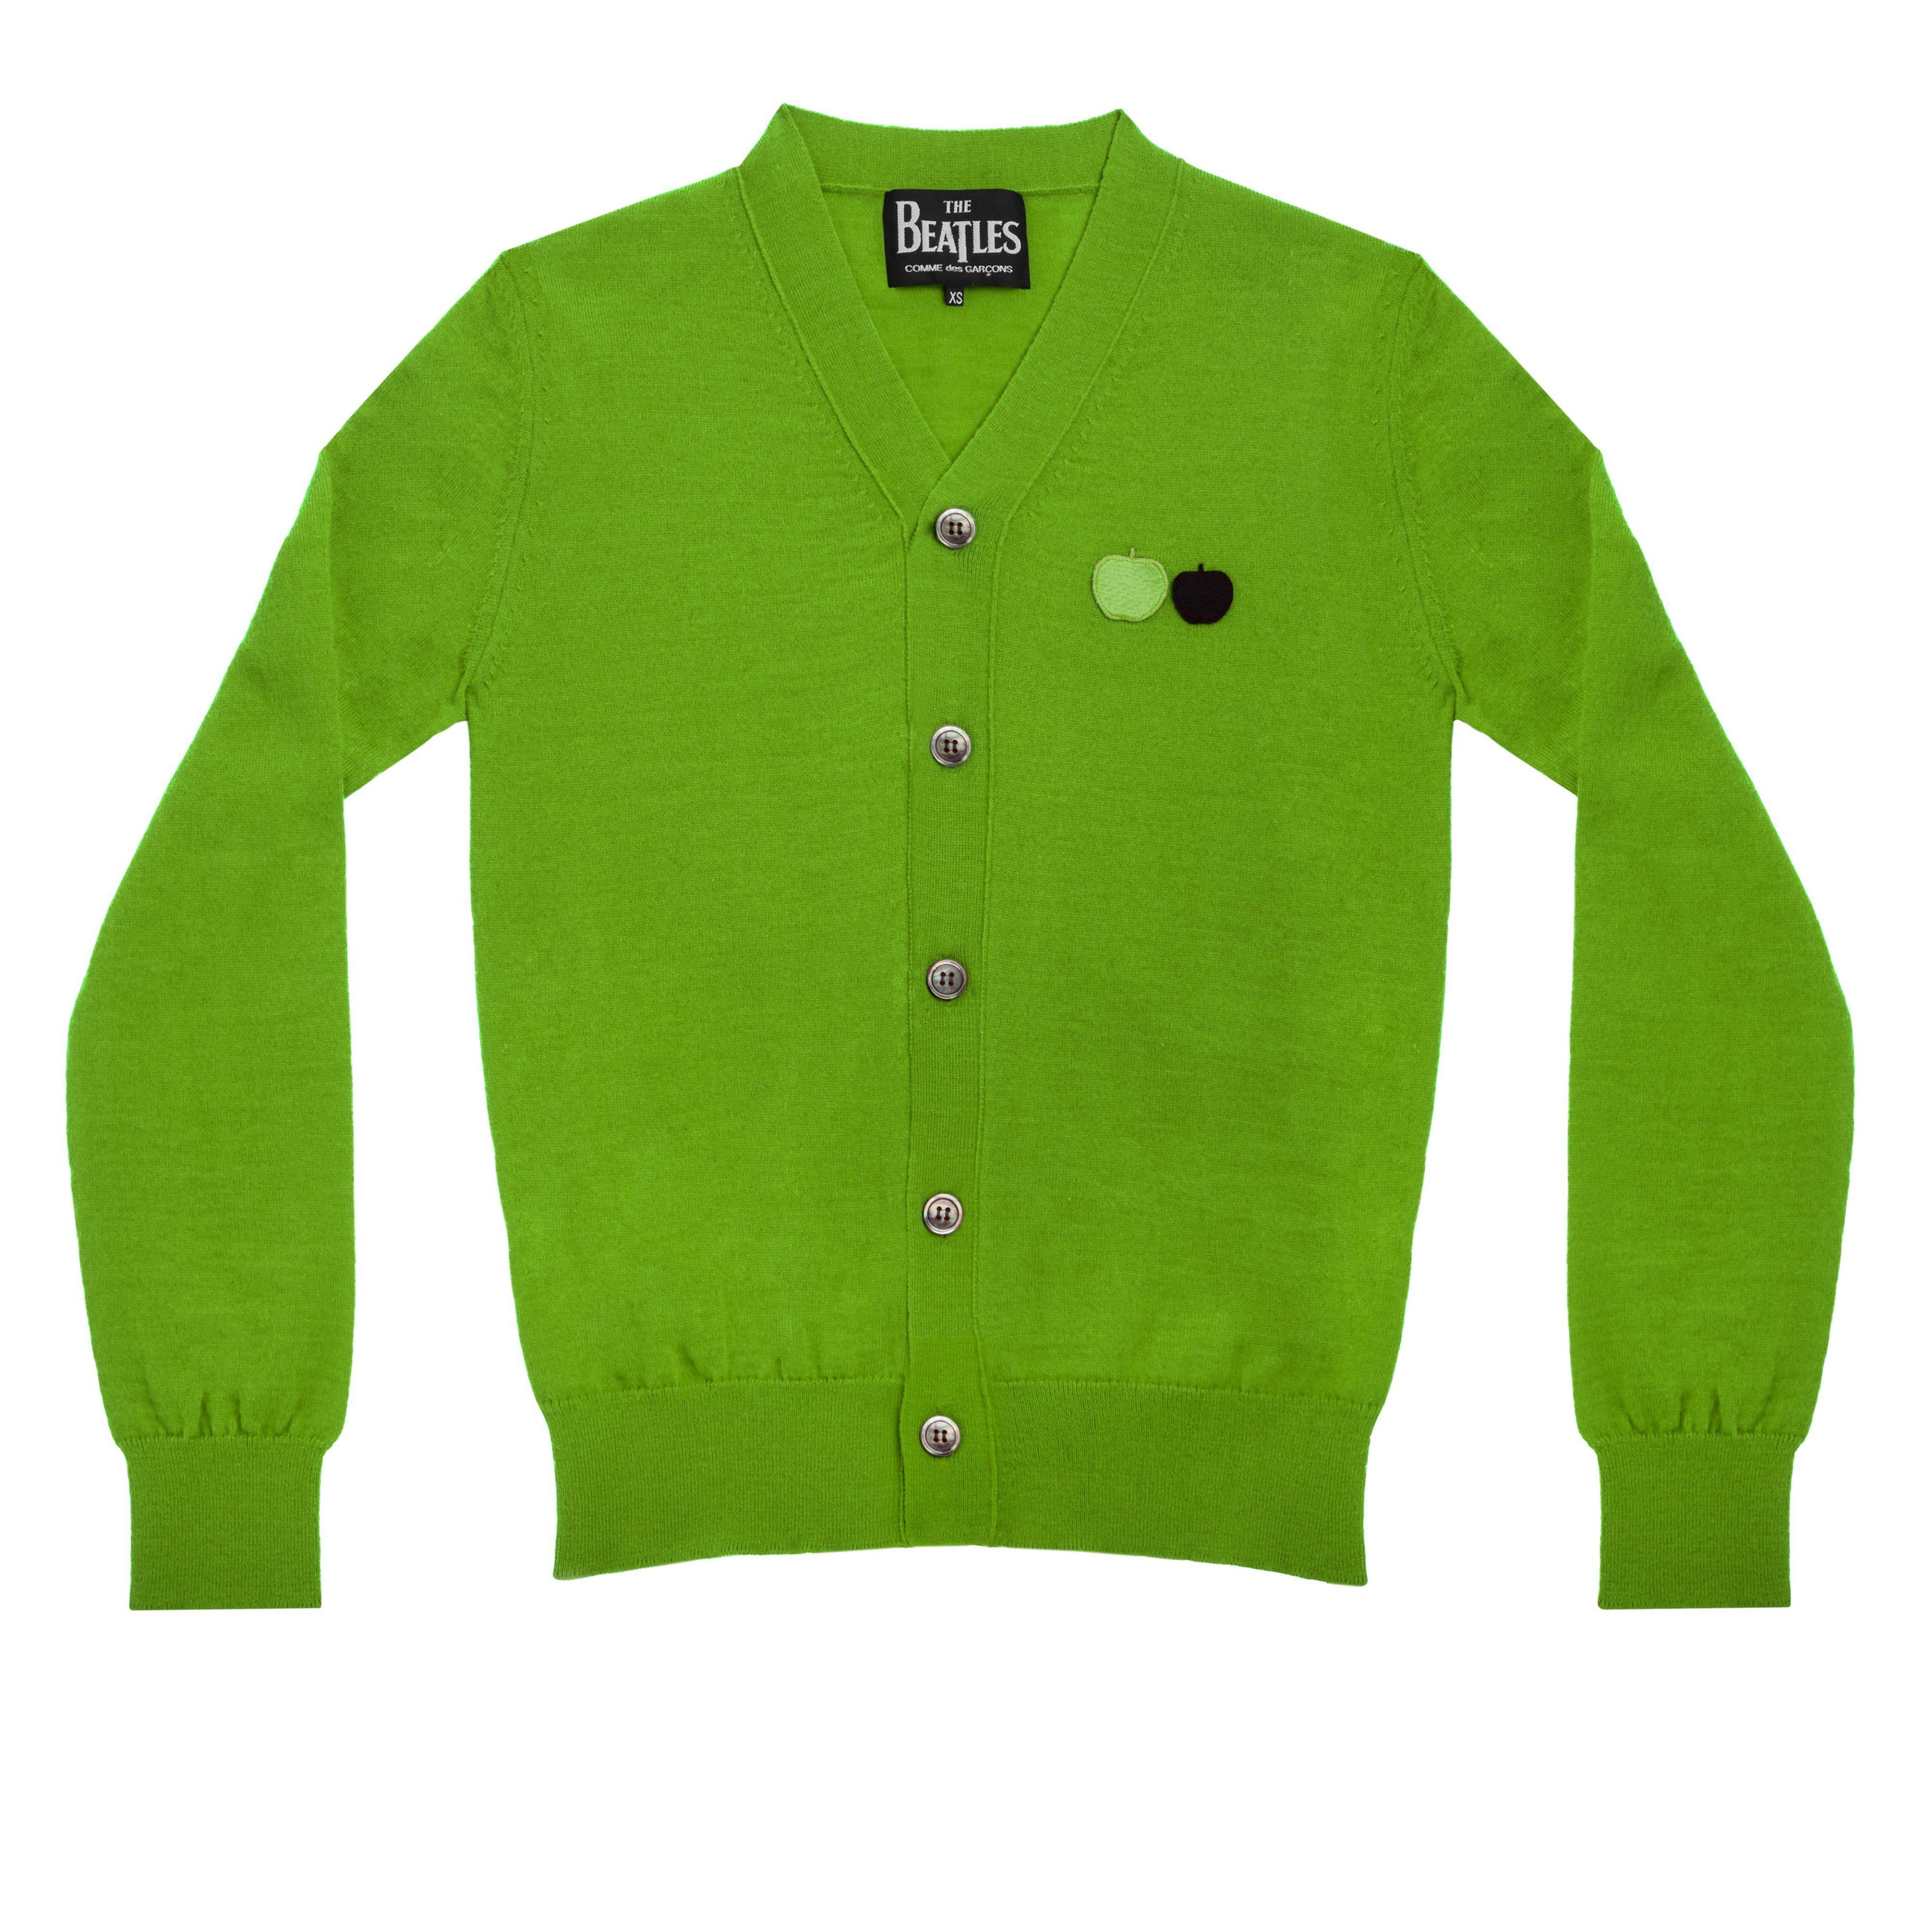 CDG Beatles - Unisex Cardgian - (Green) by COMME DES GARCONS